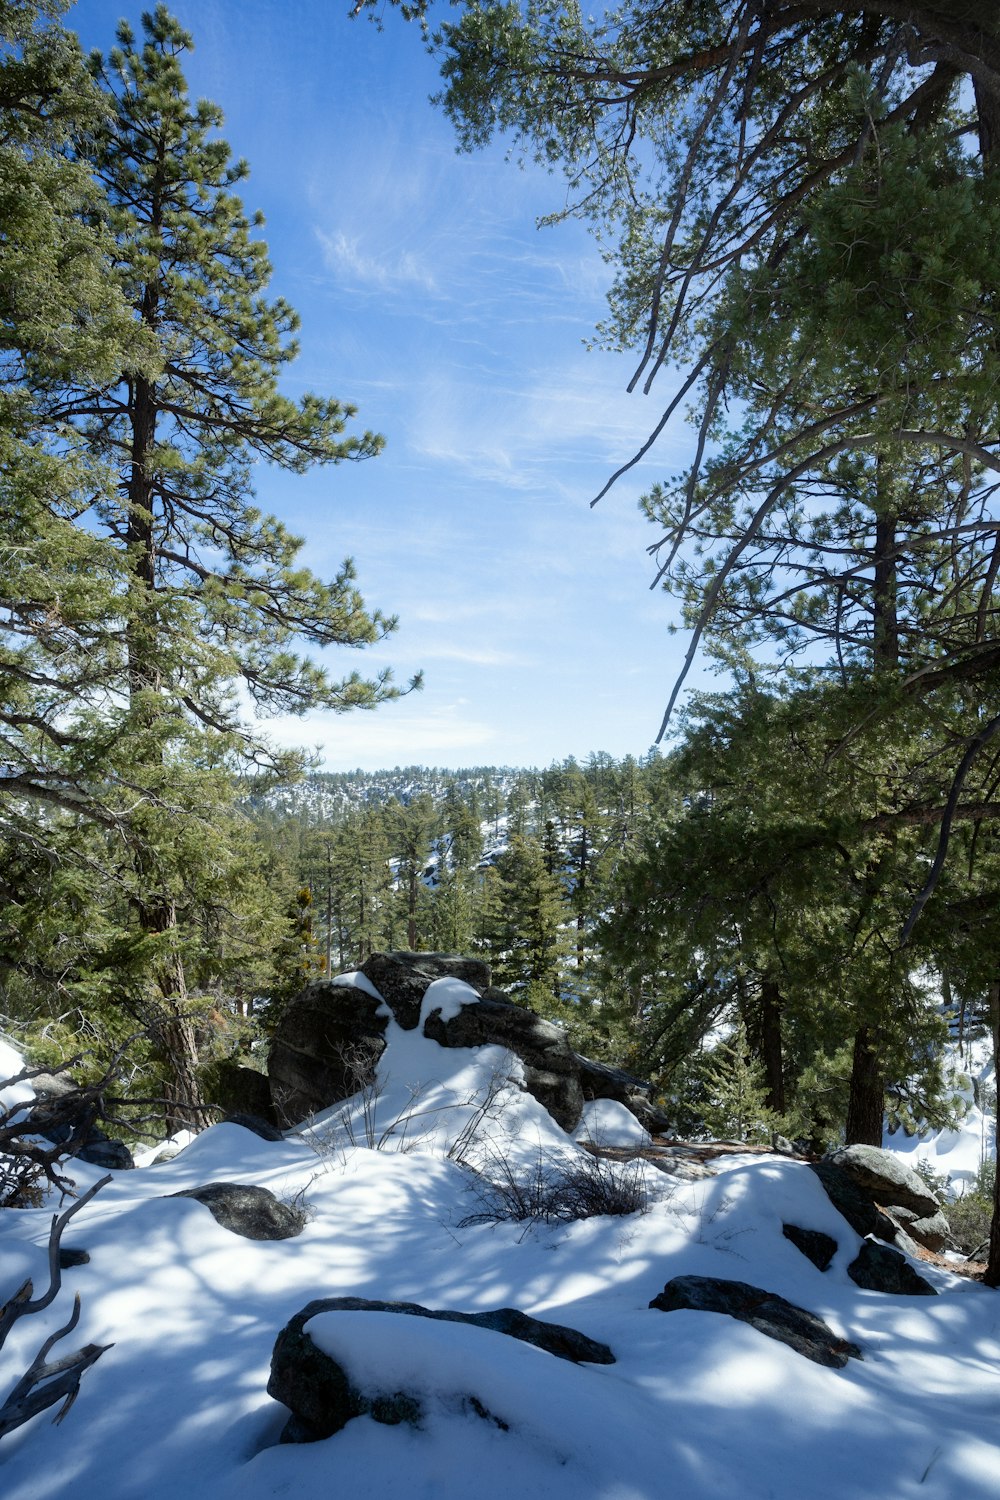 a snow covered mountain with trees and rocks